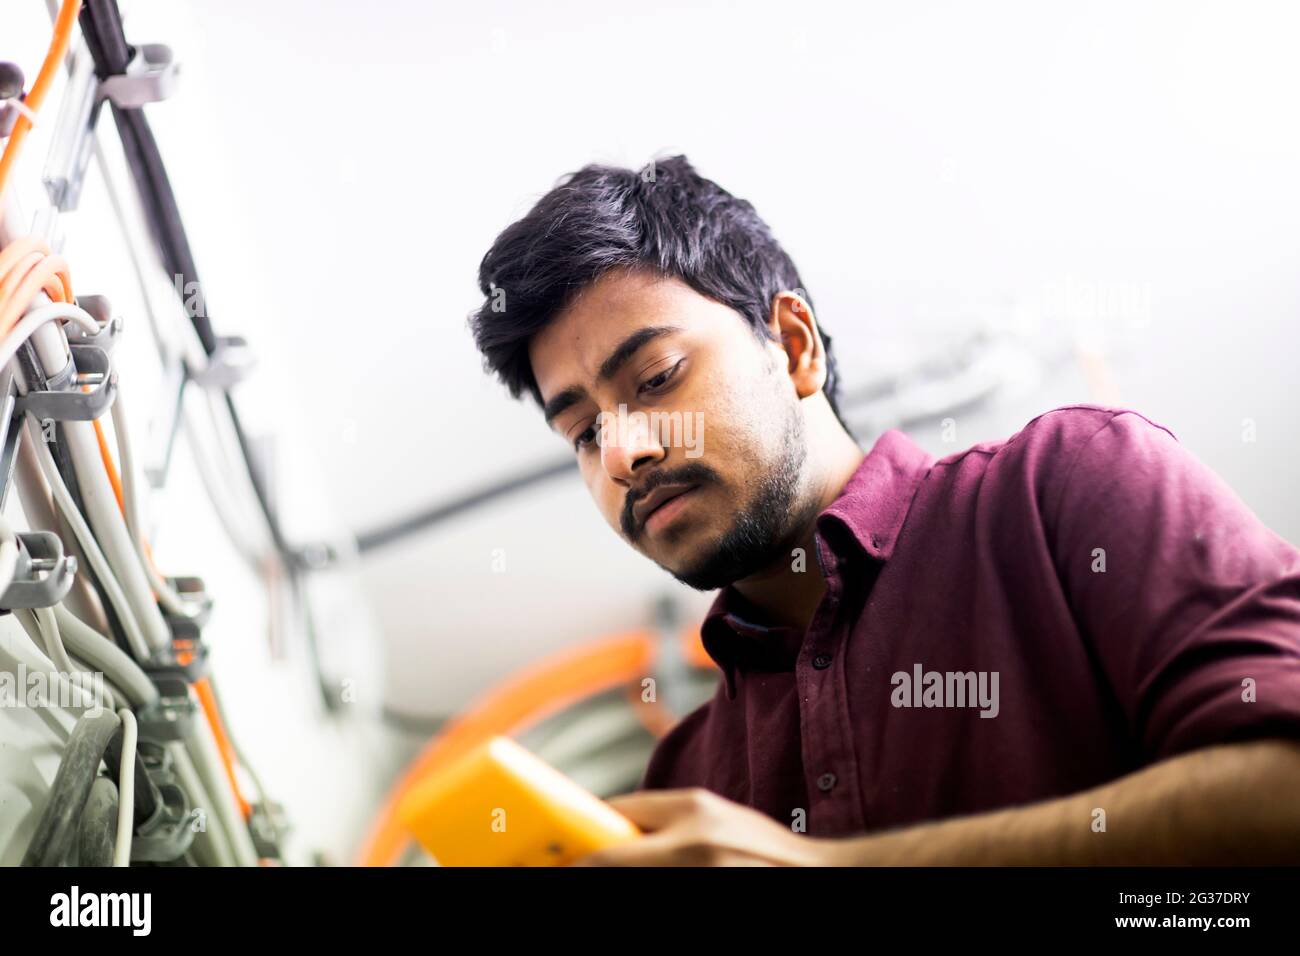 Young technician at work, Baden-Wuerttemberg, Germany Stock Photo